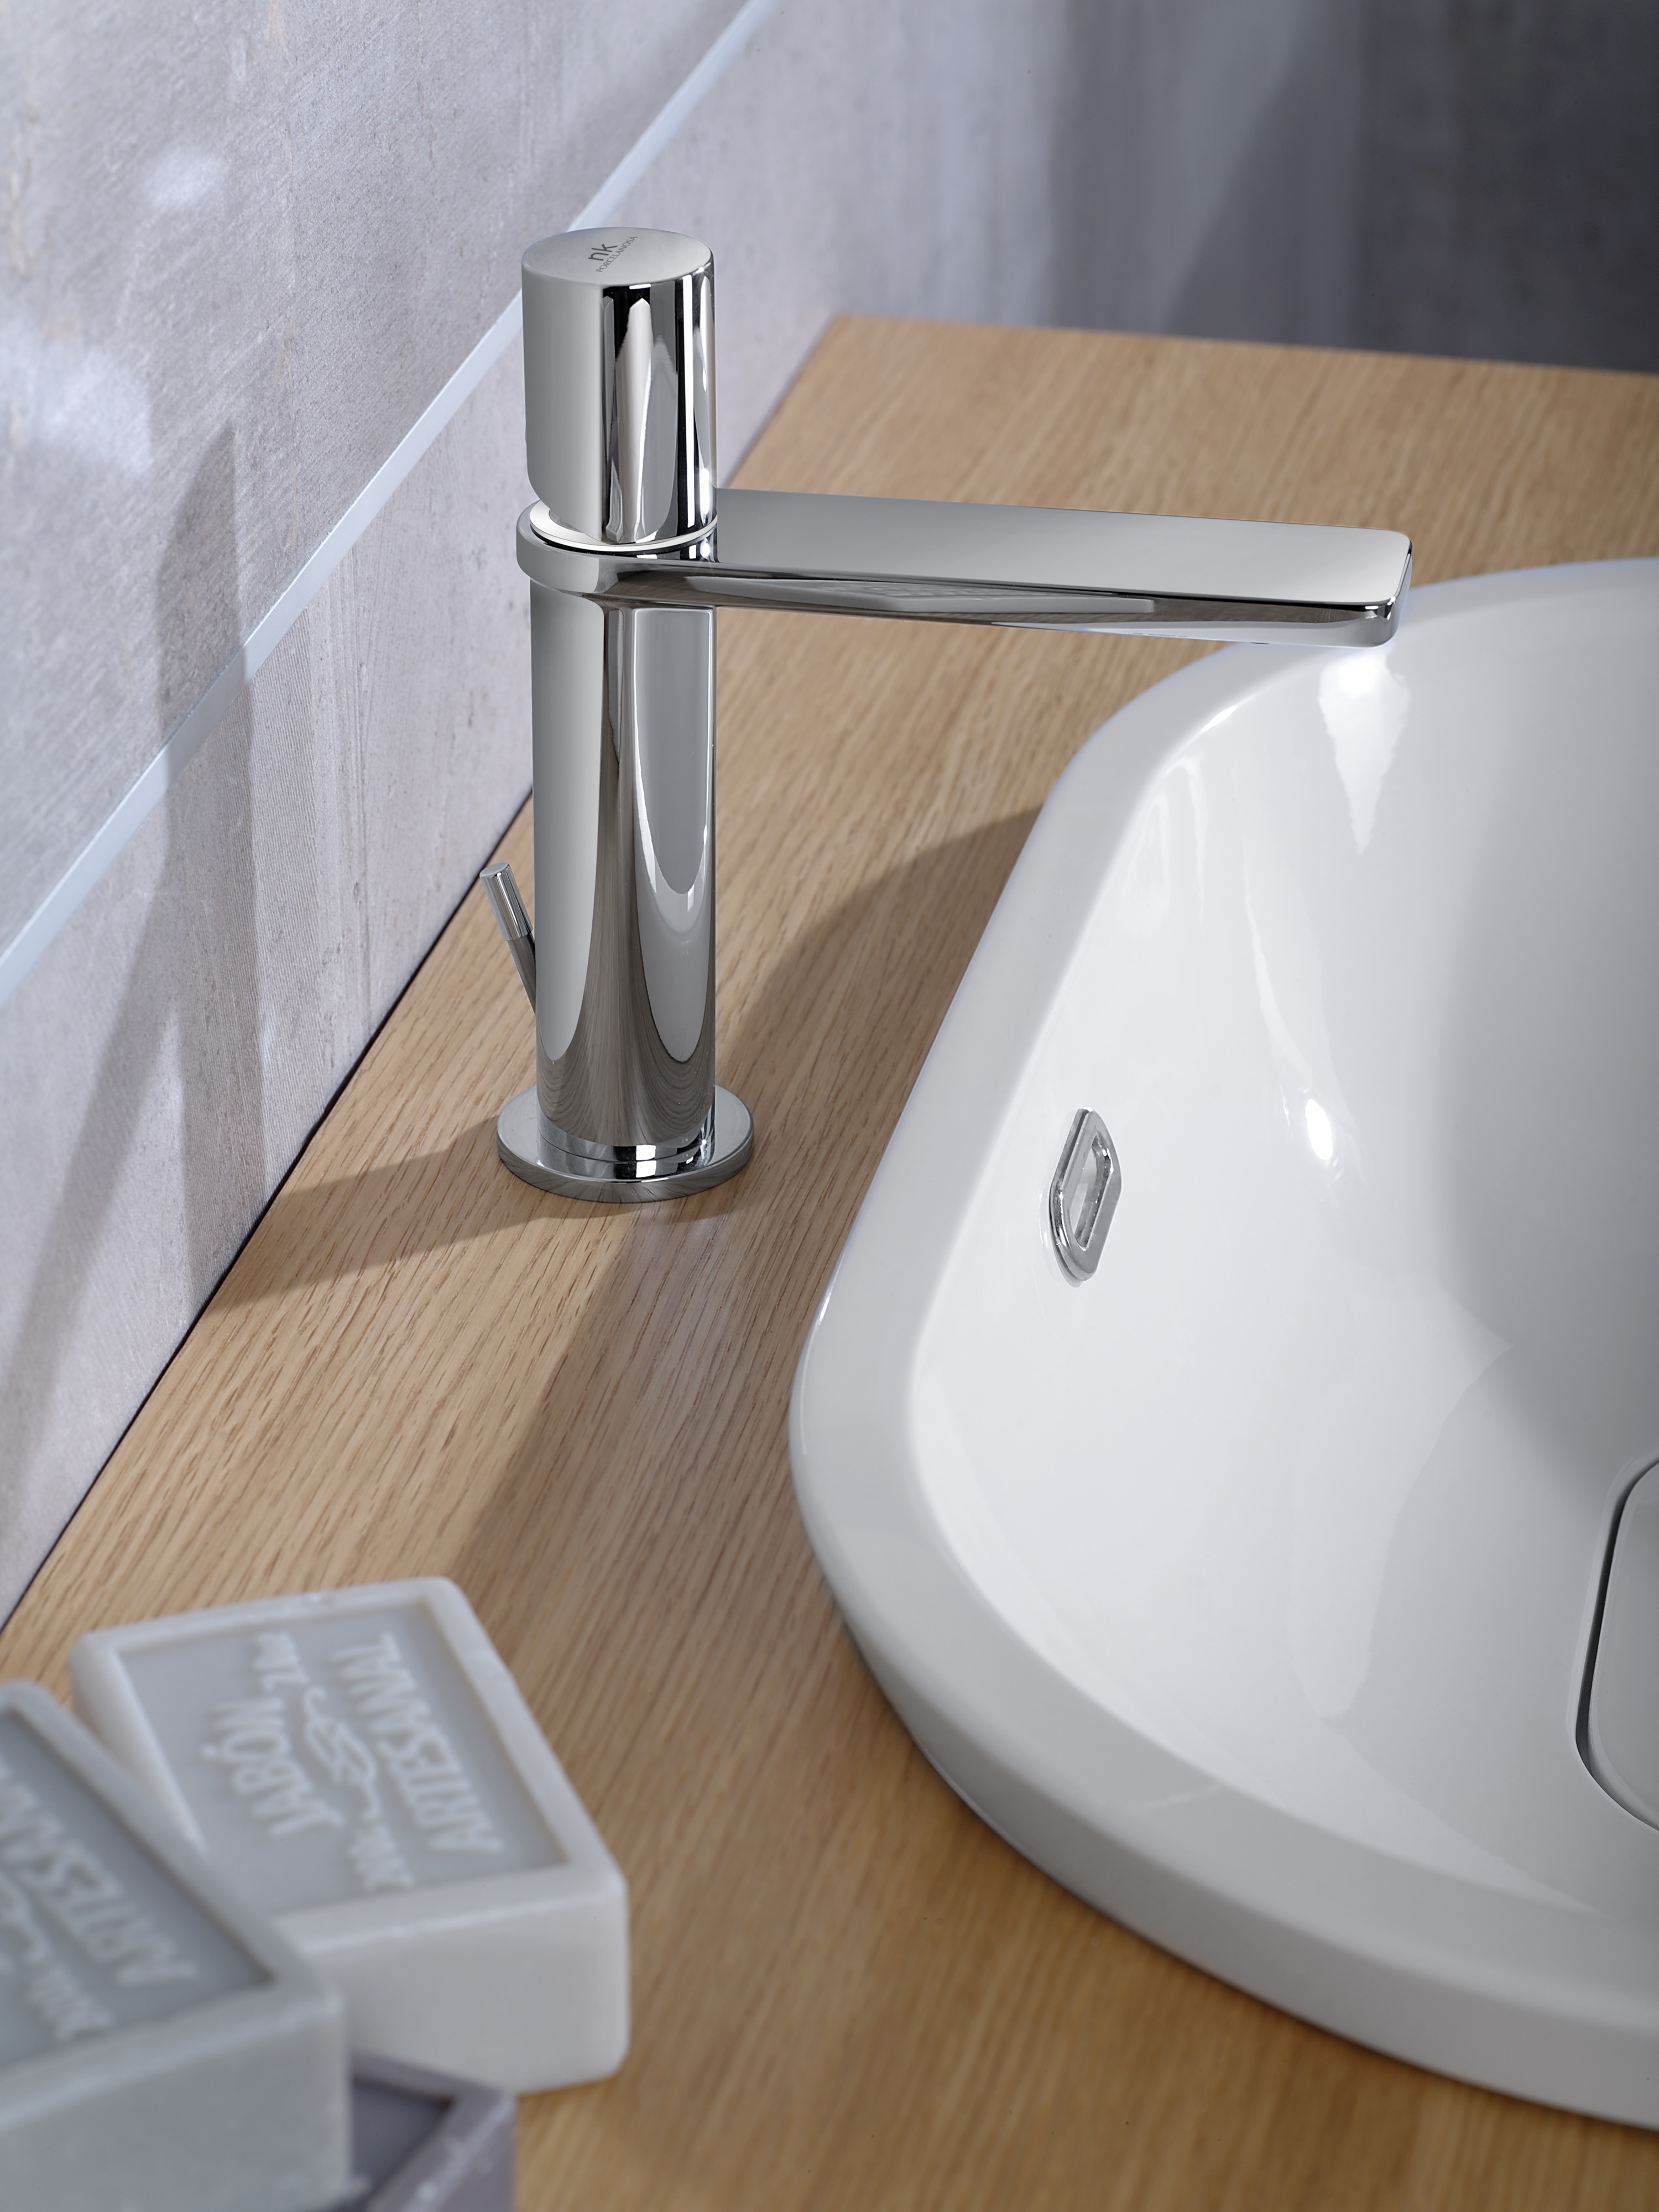 Forma: new sustainable bathroom taps by Noken